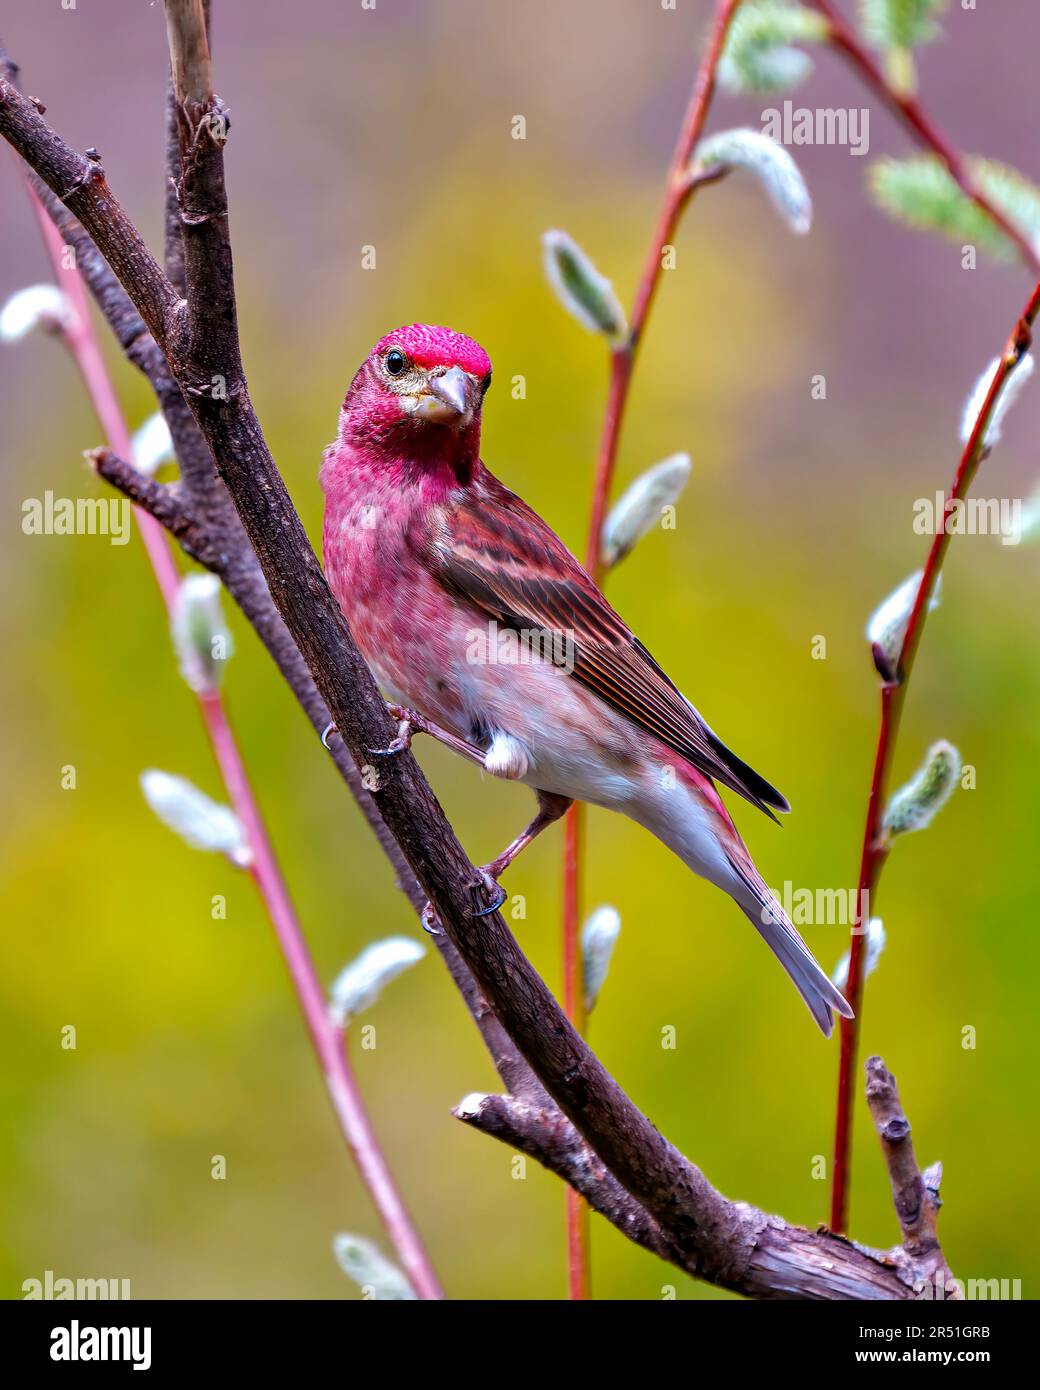 Purple Finch male close-up side view perched on a leaf bud branch in its environment and habitat surrounding with a colourful background in the spring Stock Photo